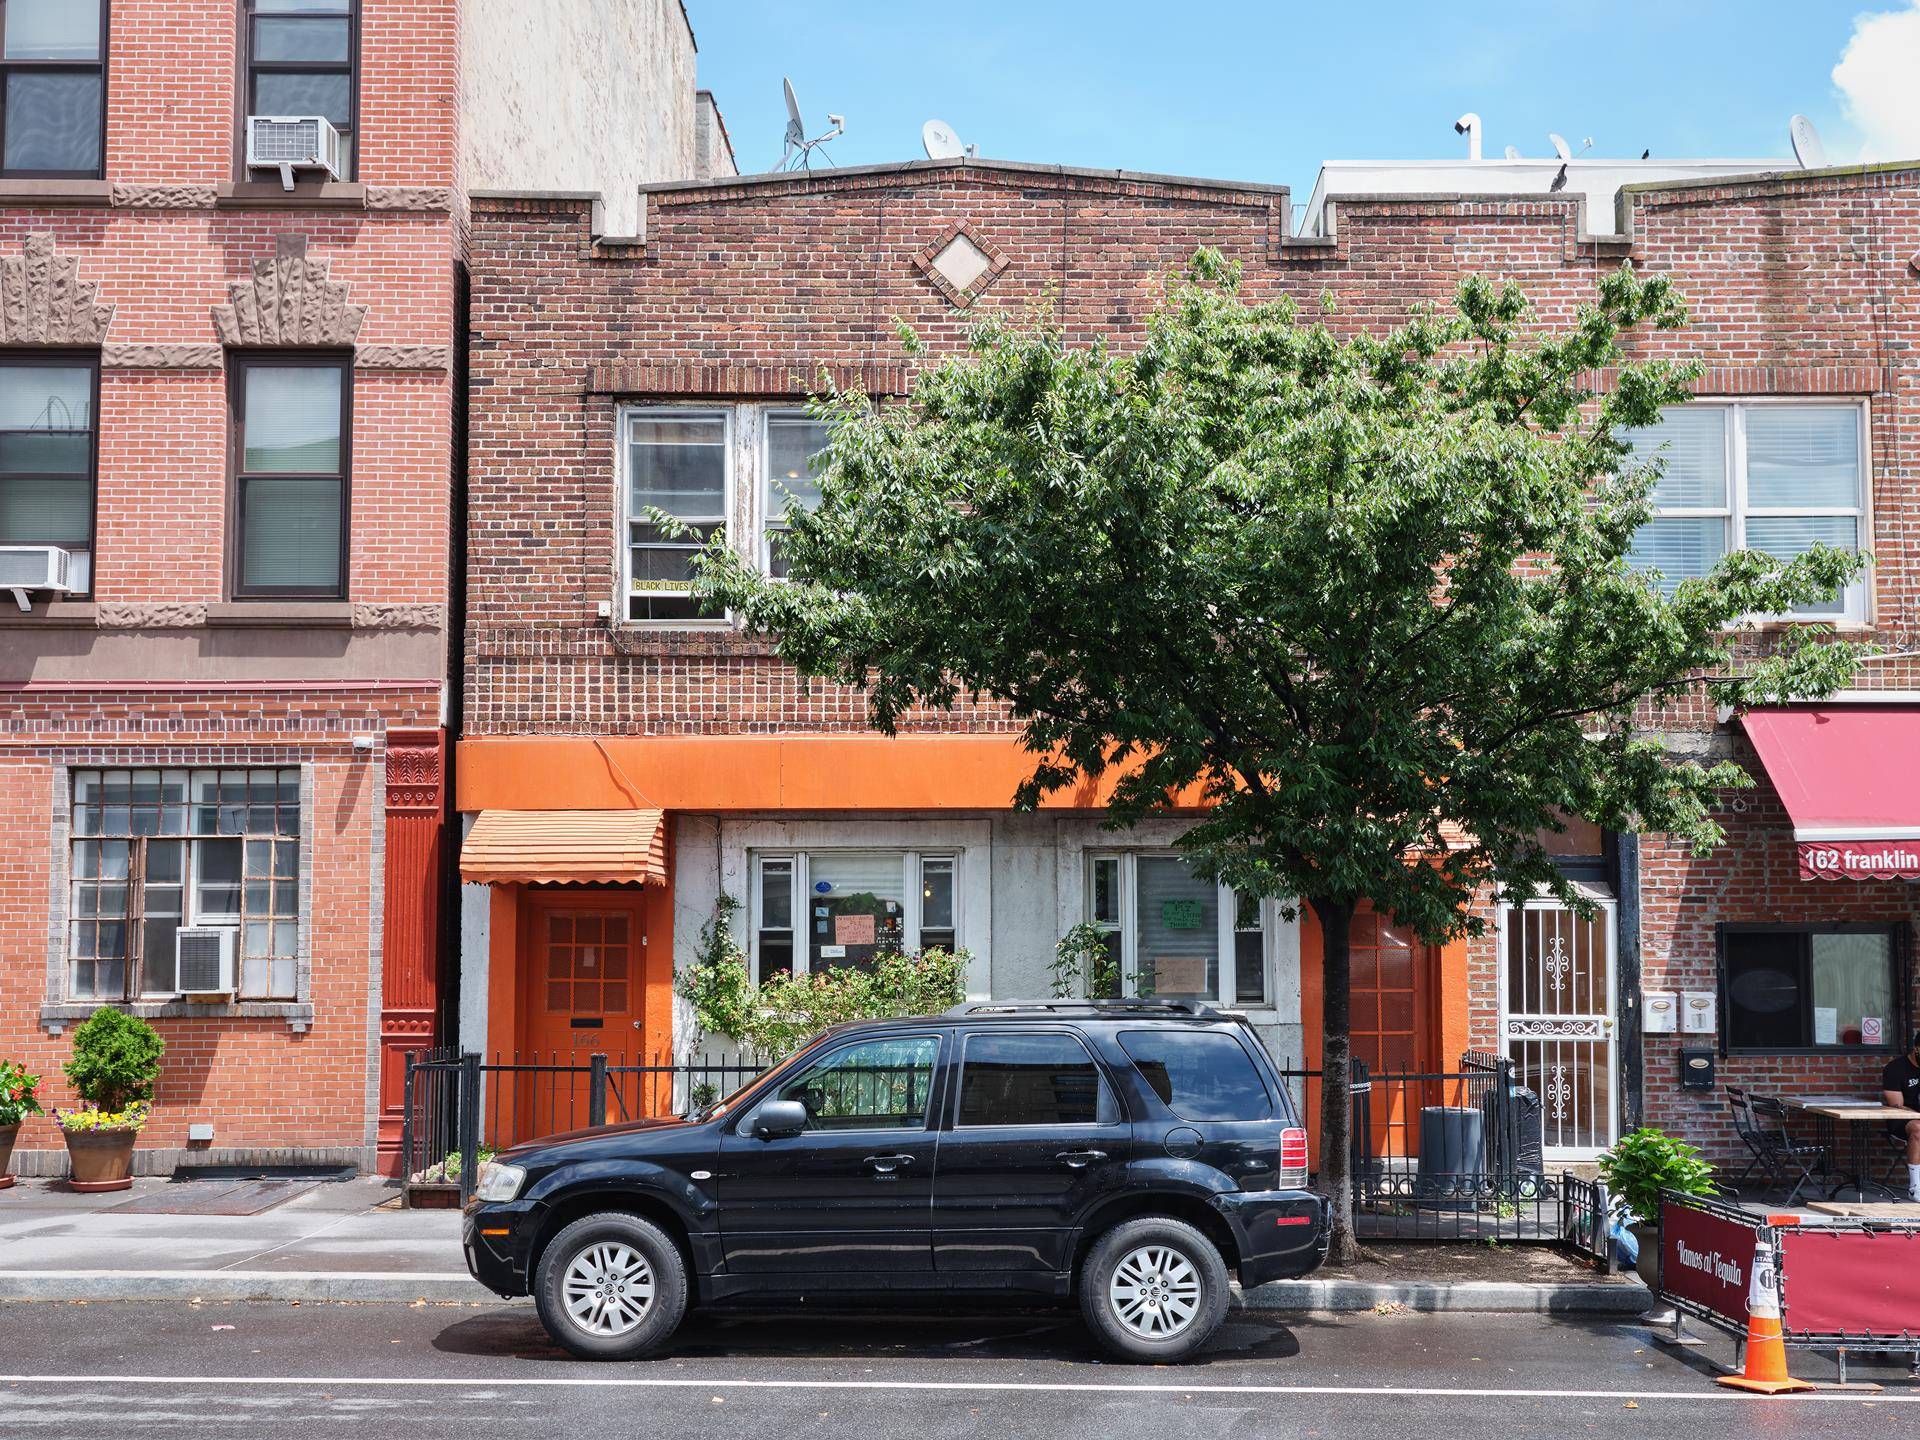 This handsome mixed use building is on the best block of Franklin St in the heart of Greenpoint, Brooklyn.